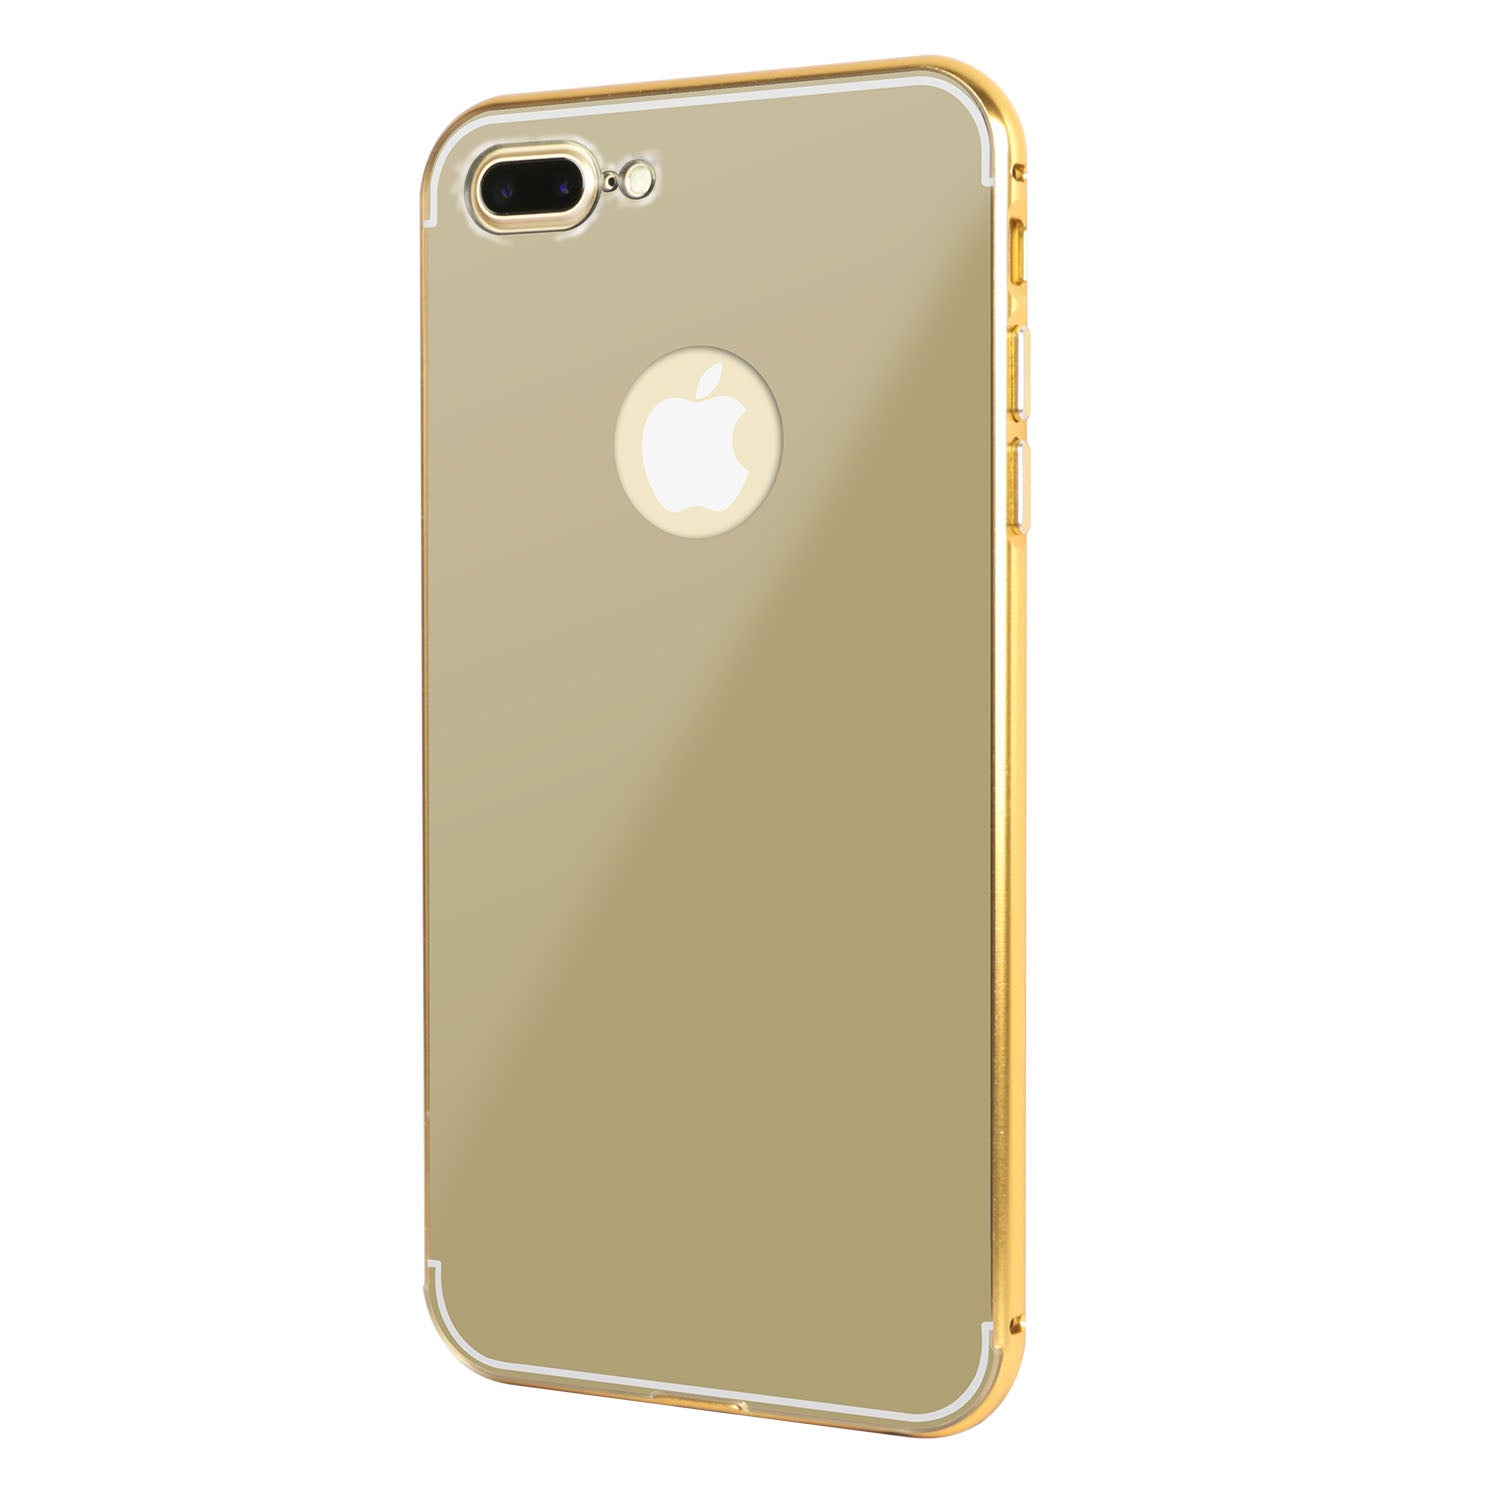 title:Slim Shock-resistant Mirror Case For iPhone 7;color:Gold